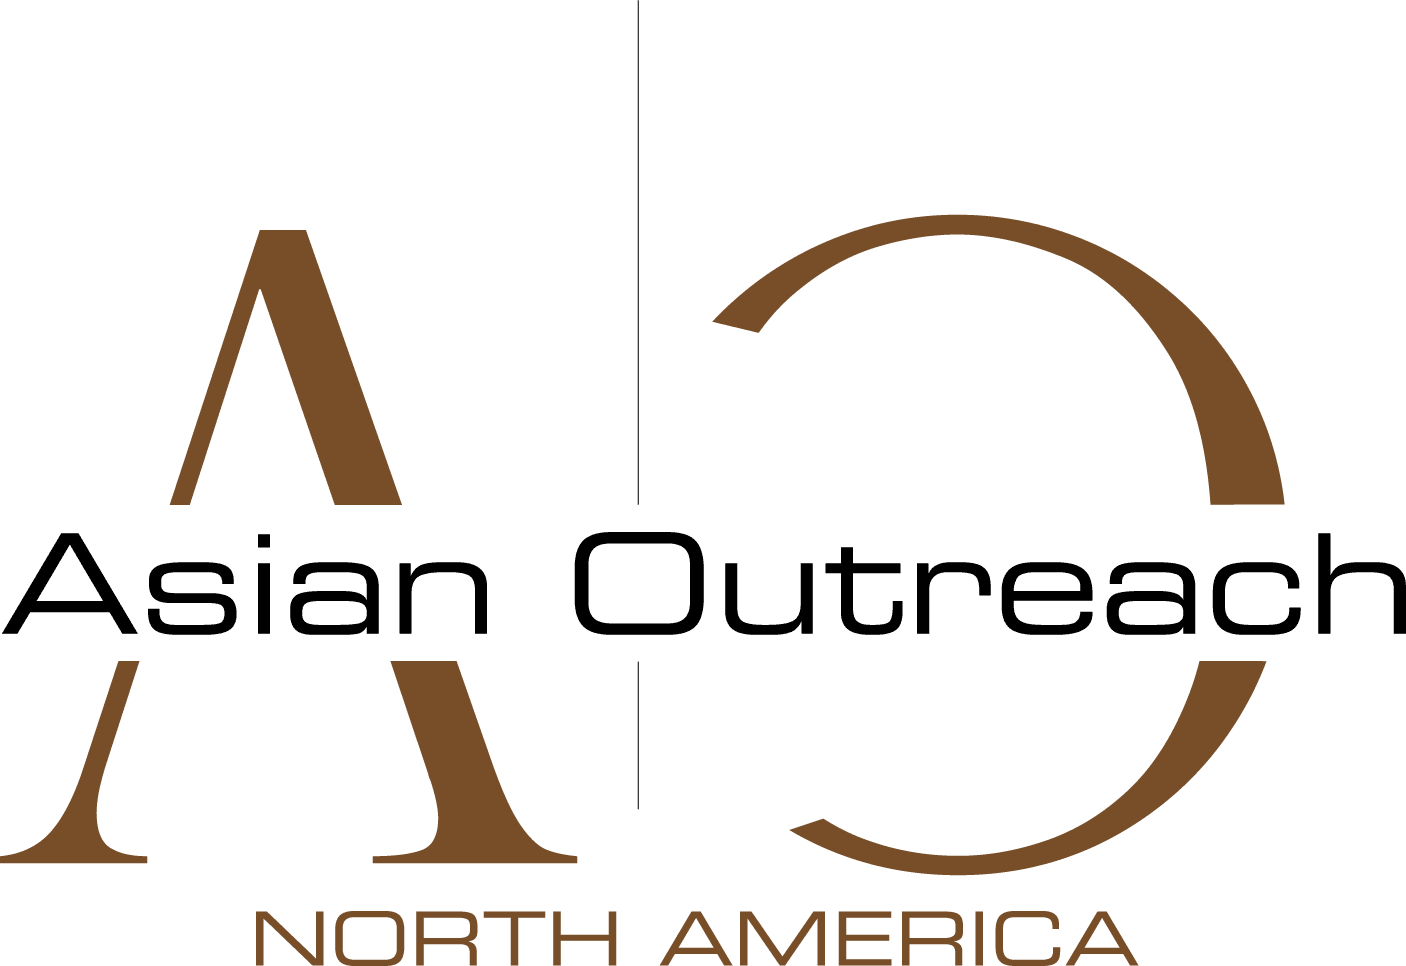 Asian outreach north America logo with letter A and O in backgound